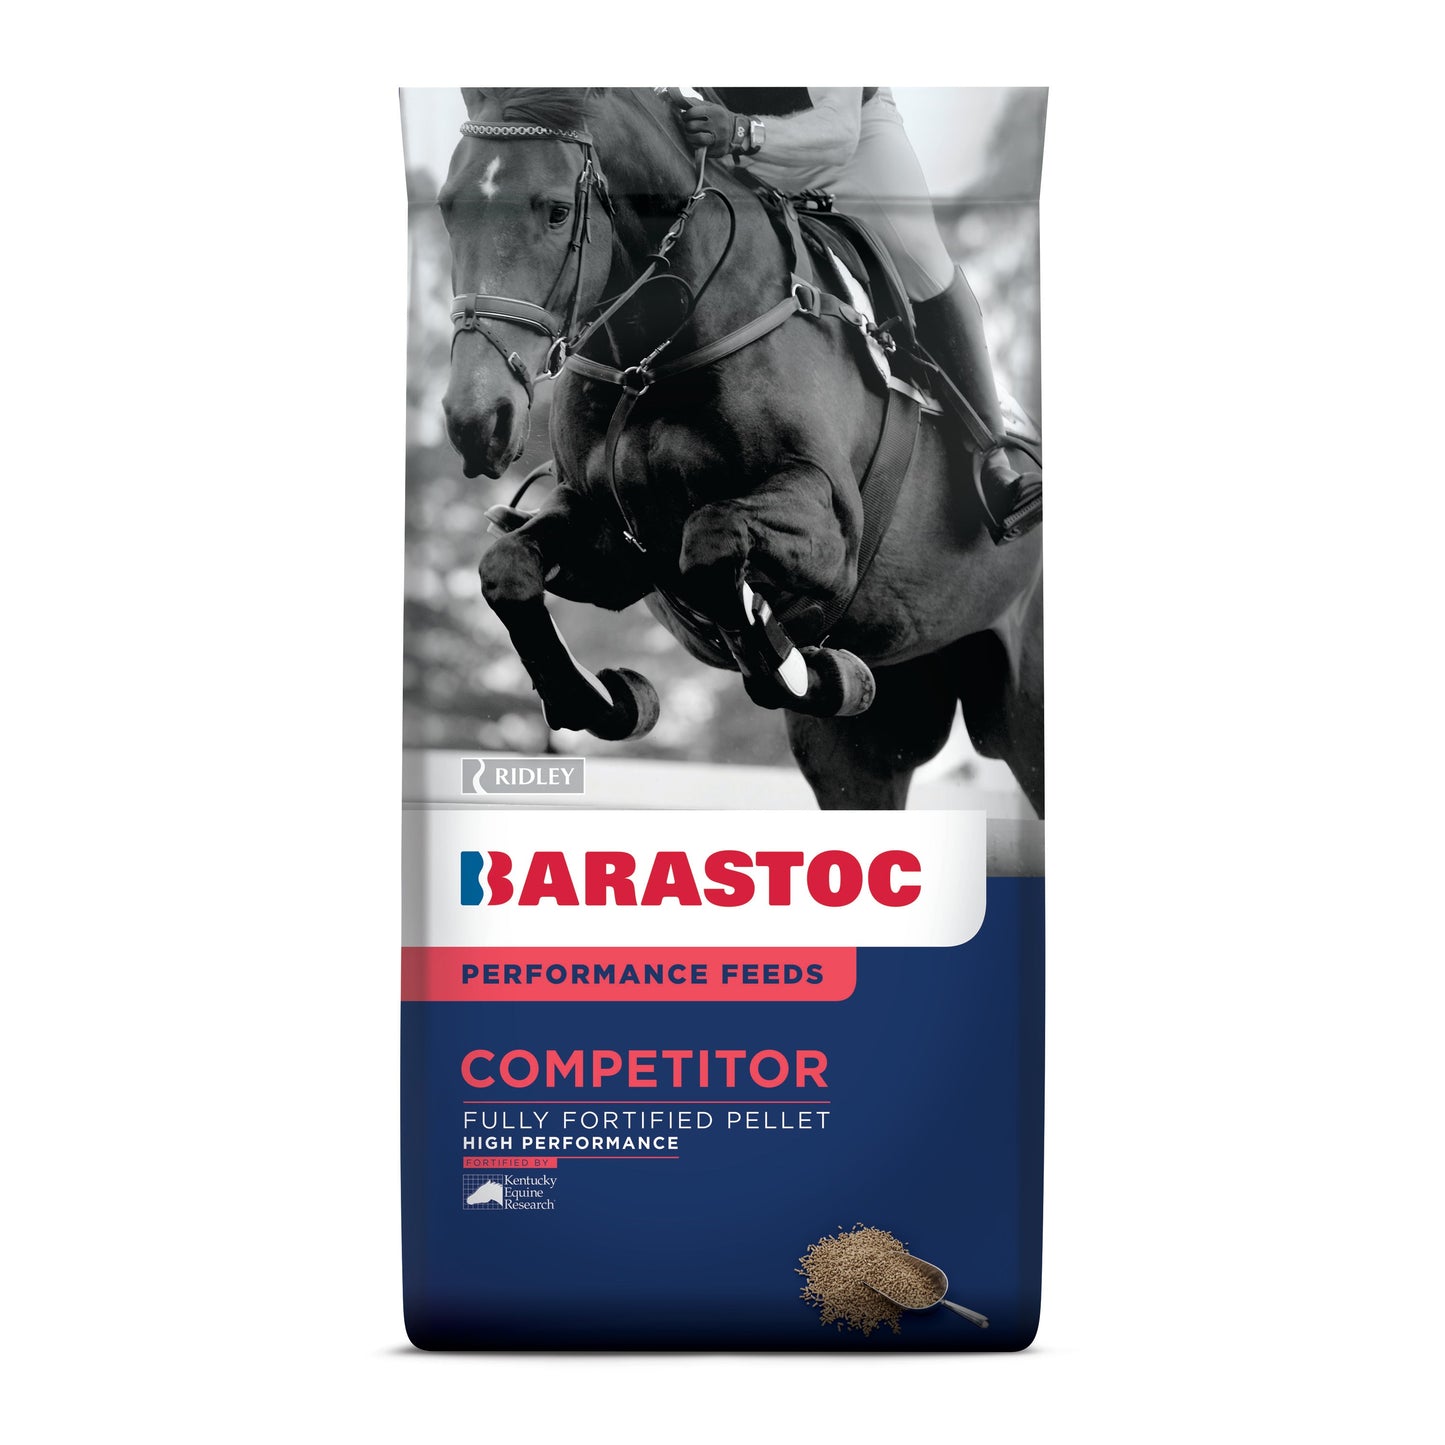 Barastoc Competitor 20kg-Southern Sport Horses-The Equestrian